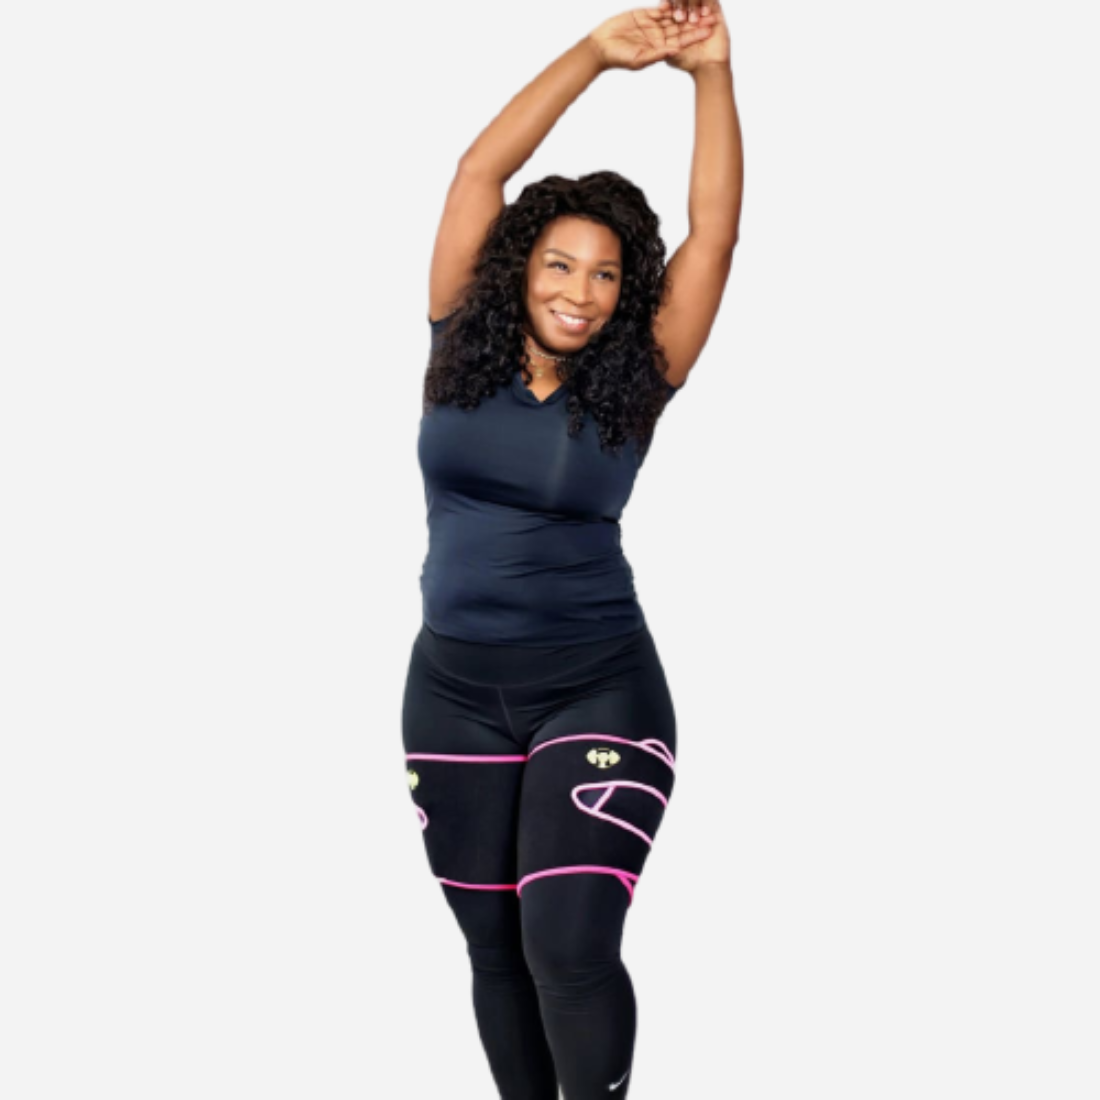 Thigh Sweatbands - Get toned and sculpted legs fast!